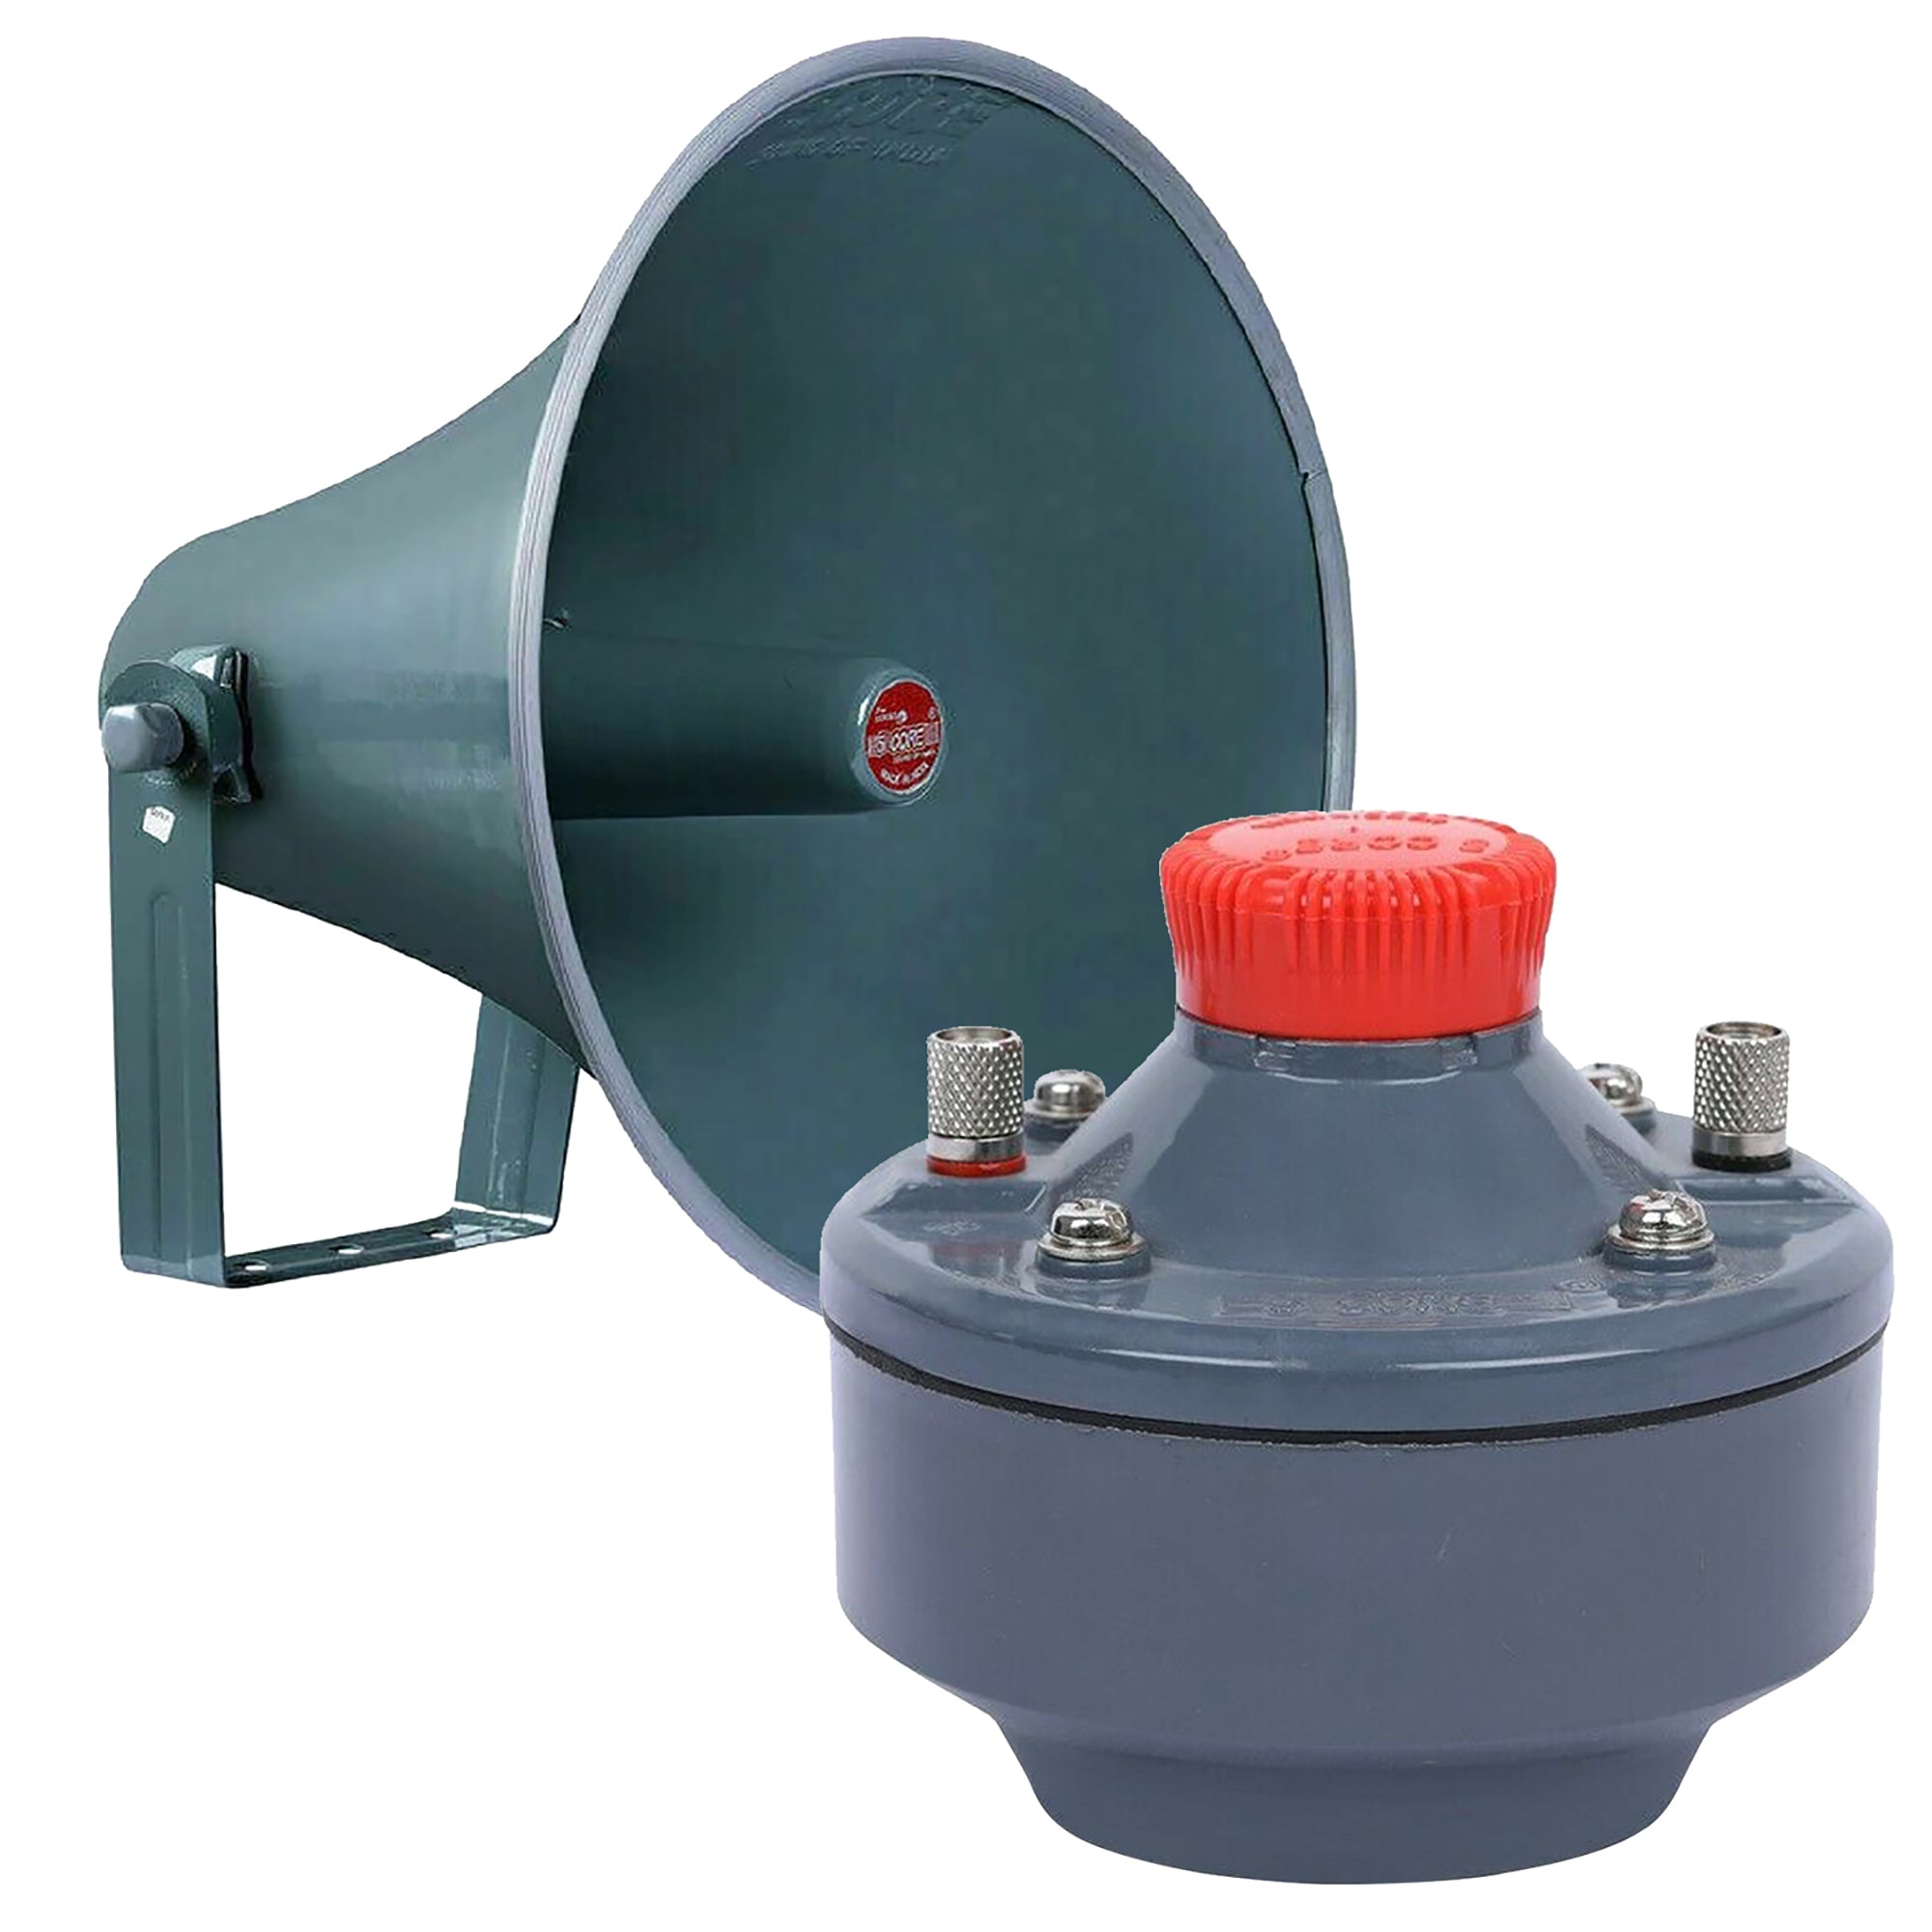 5 Core PA Horn Speaker 400W PMPO Compression Driver in 16 Inch Throat Mounting Bracket Included